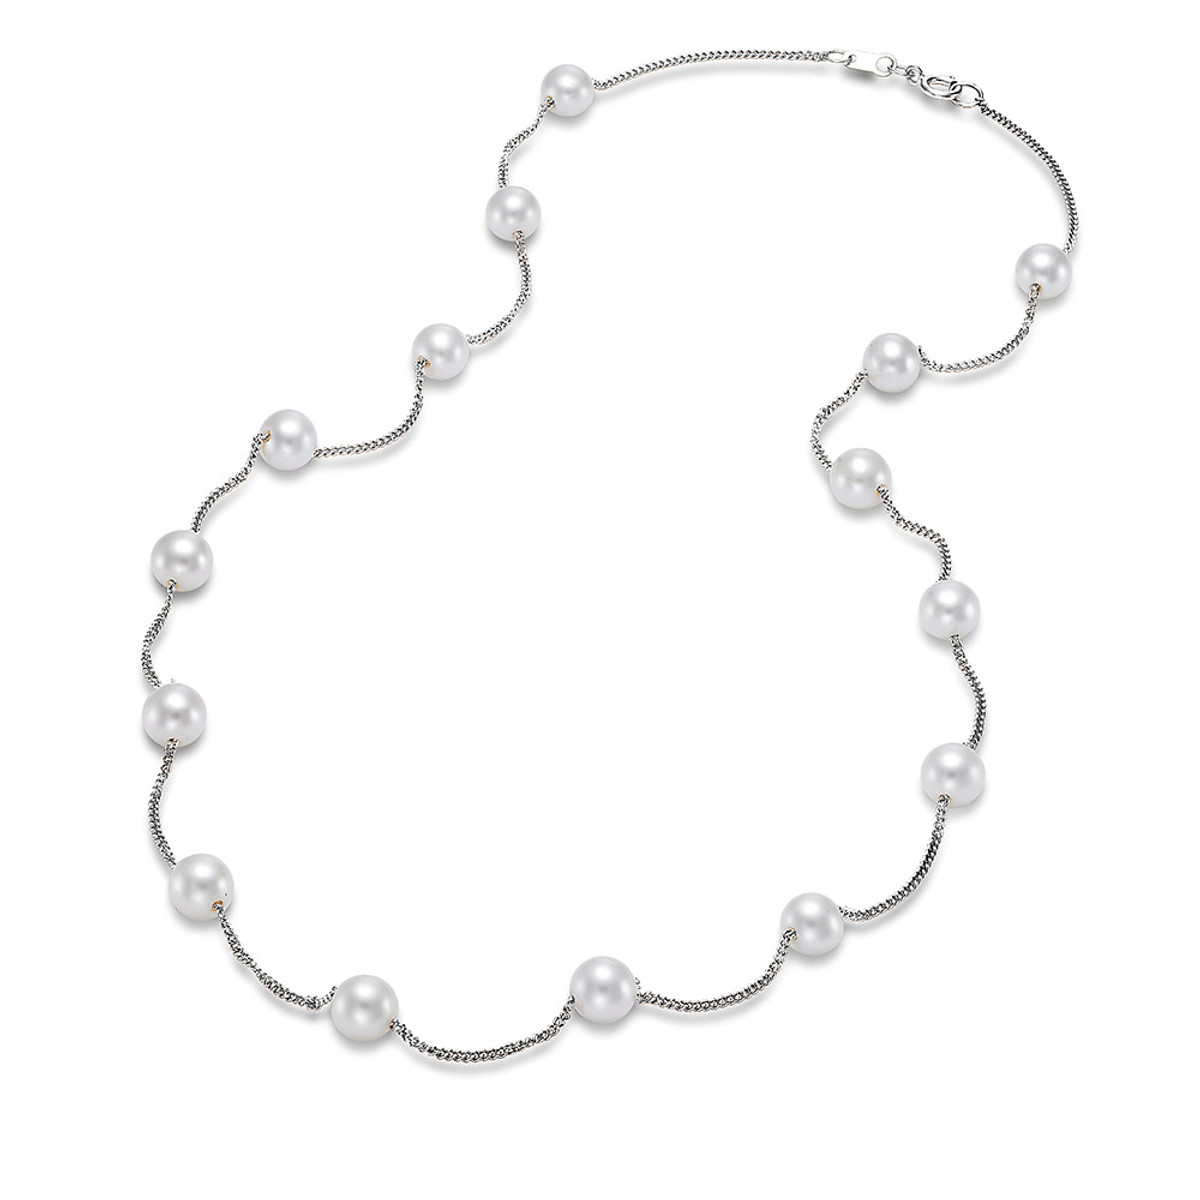 Hyde Park 14K White Gold Pearl Necklace.-25829 Product Image